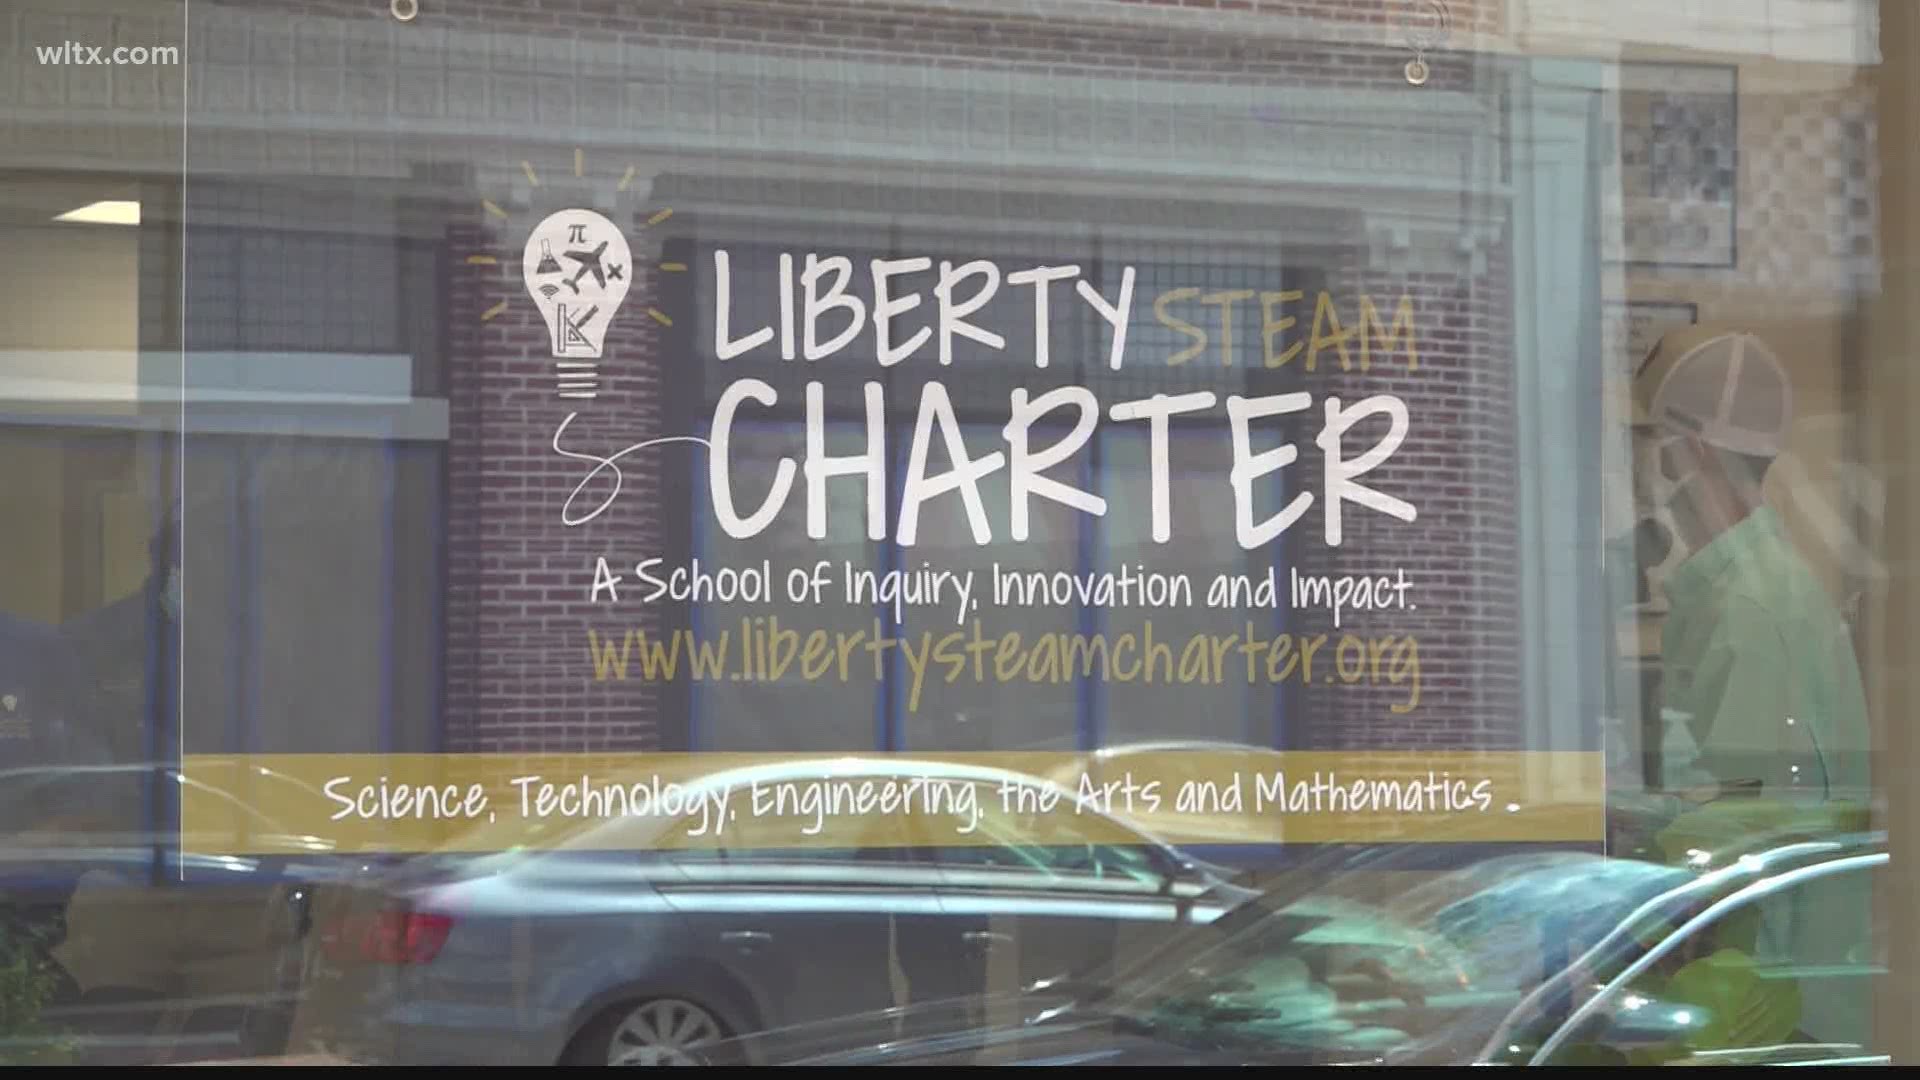 The charter school will open in the old Liberty Elementary school in Sumter.